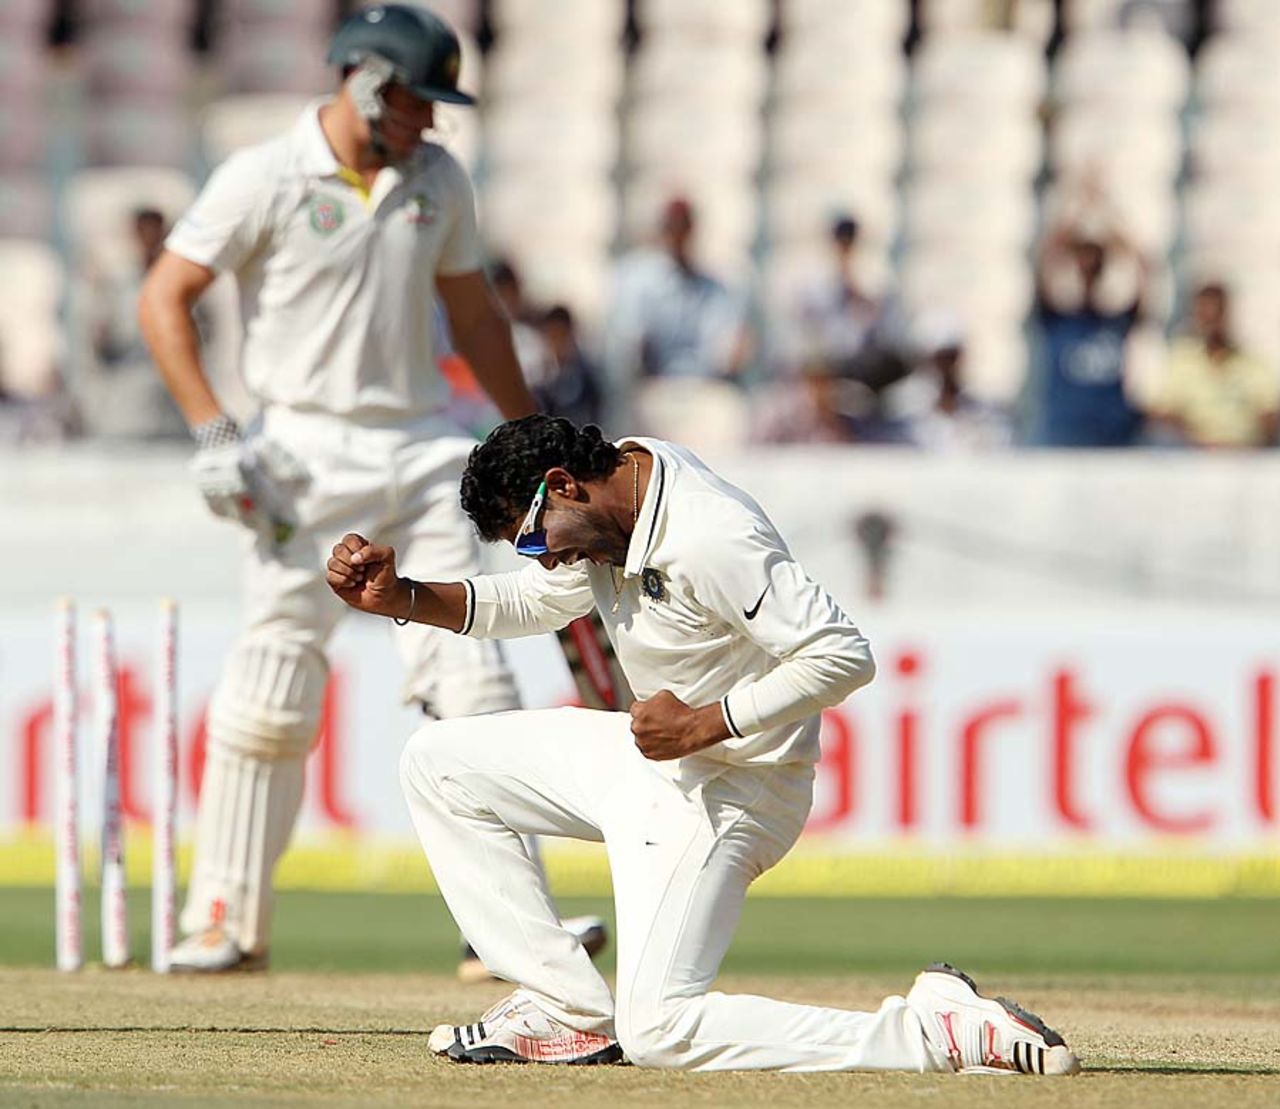 Ravindra Jadeja dismissed Moises Henriques cheaply, and followed it up with two more wickets, India v Australia, 2nd Test, Hyderabad, 1st day, March 2, 2013